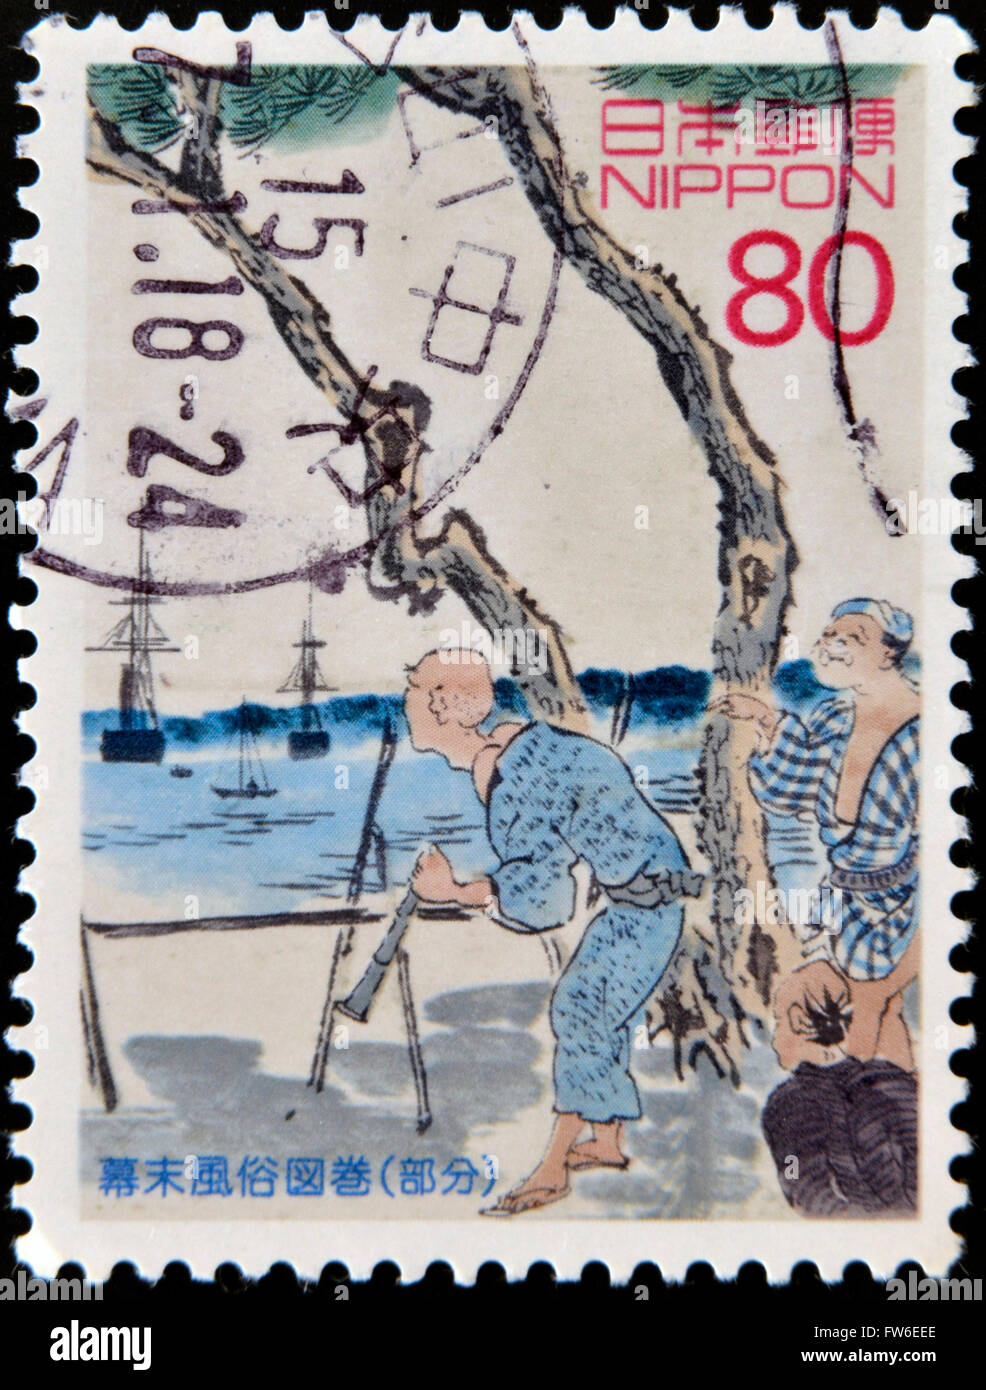 JAPAN - CIRCA 2003: A stamp printed in Japan shows Screen art depicting return of Commodore Perry fleet to Japan, circa 2003 Stock Photo